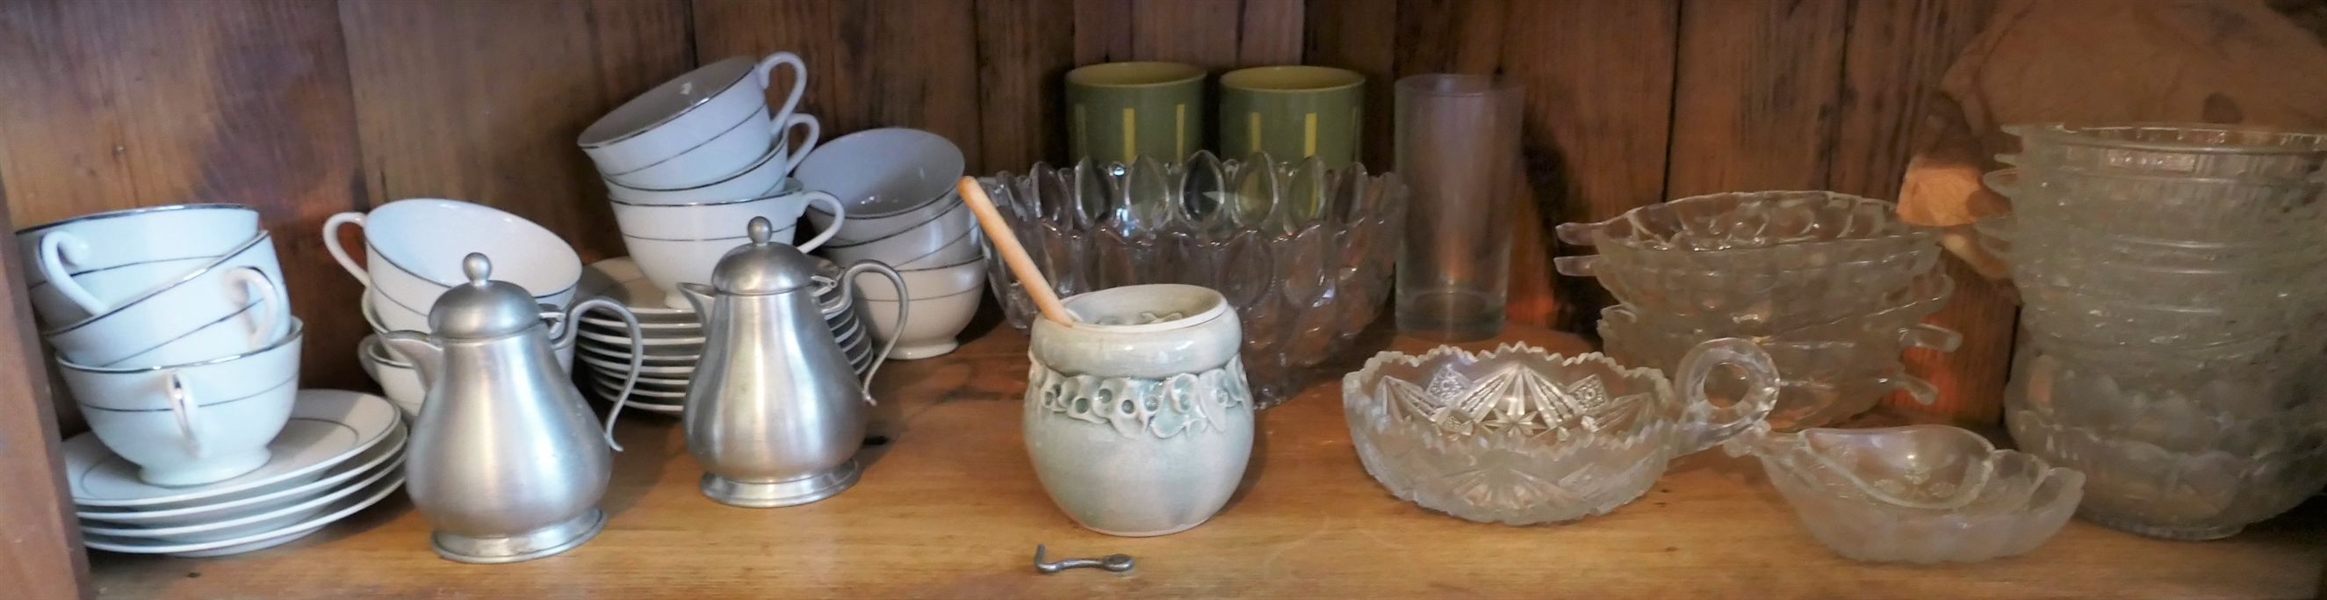 Shelf Lot including Honey Pot, Early American Press Glass, Nappy, Cup & Saucer Sets, and Bowls